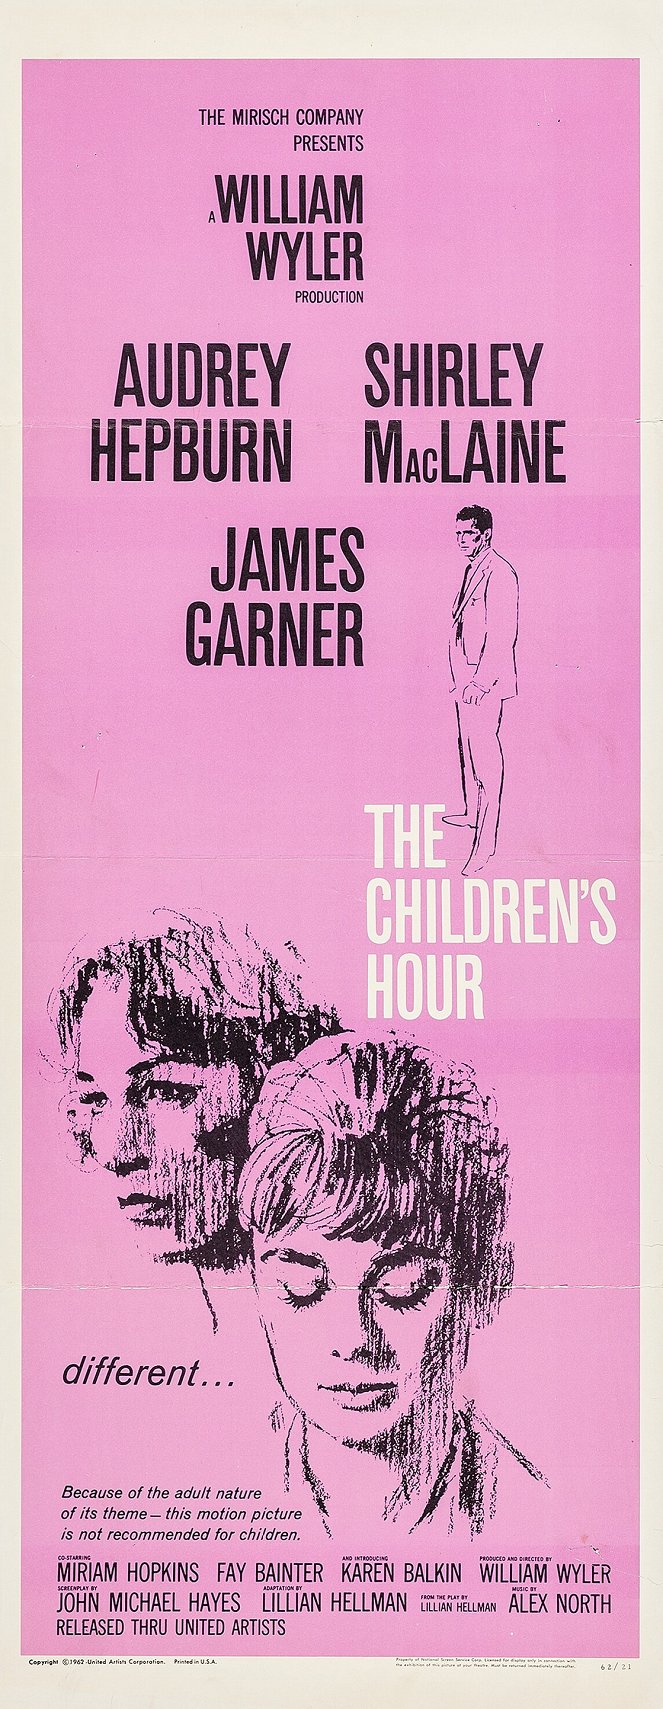 The Children's Hour - Posters